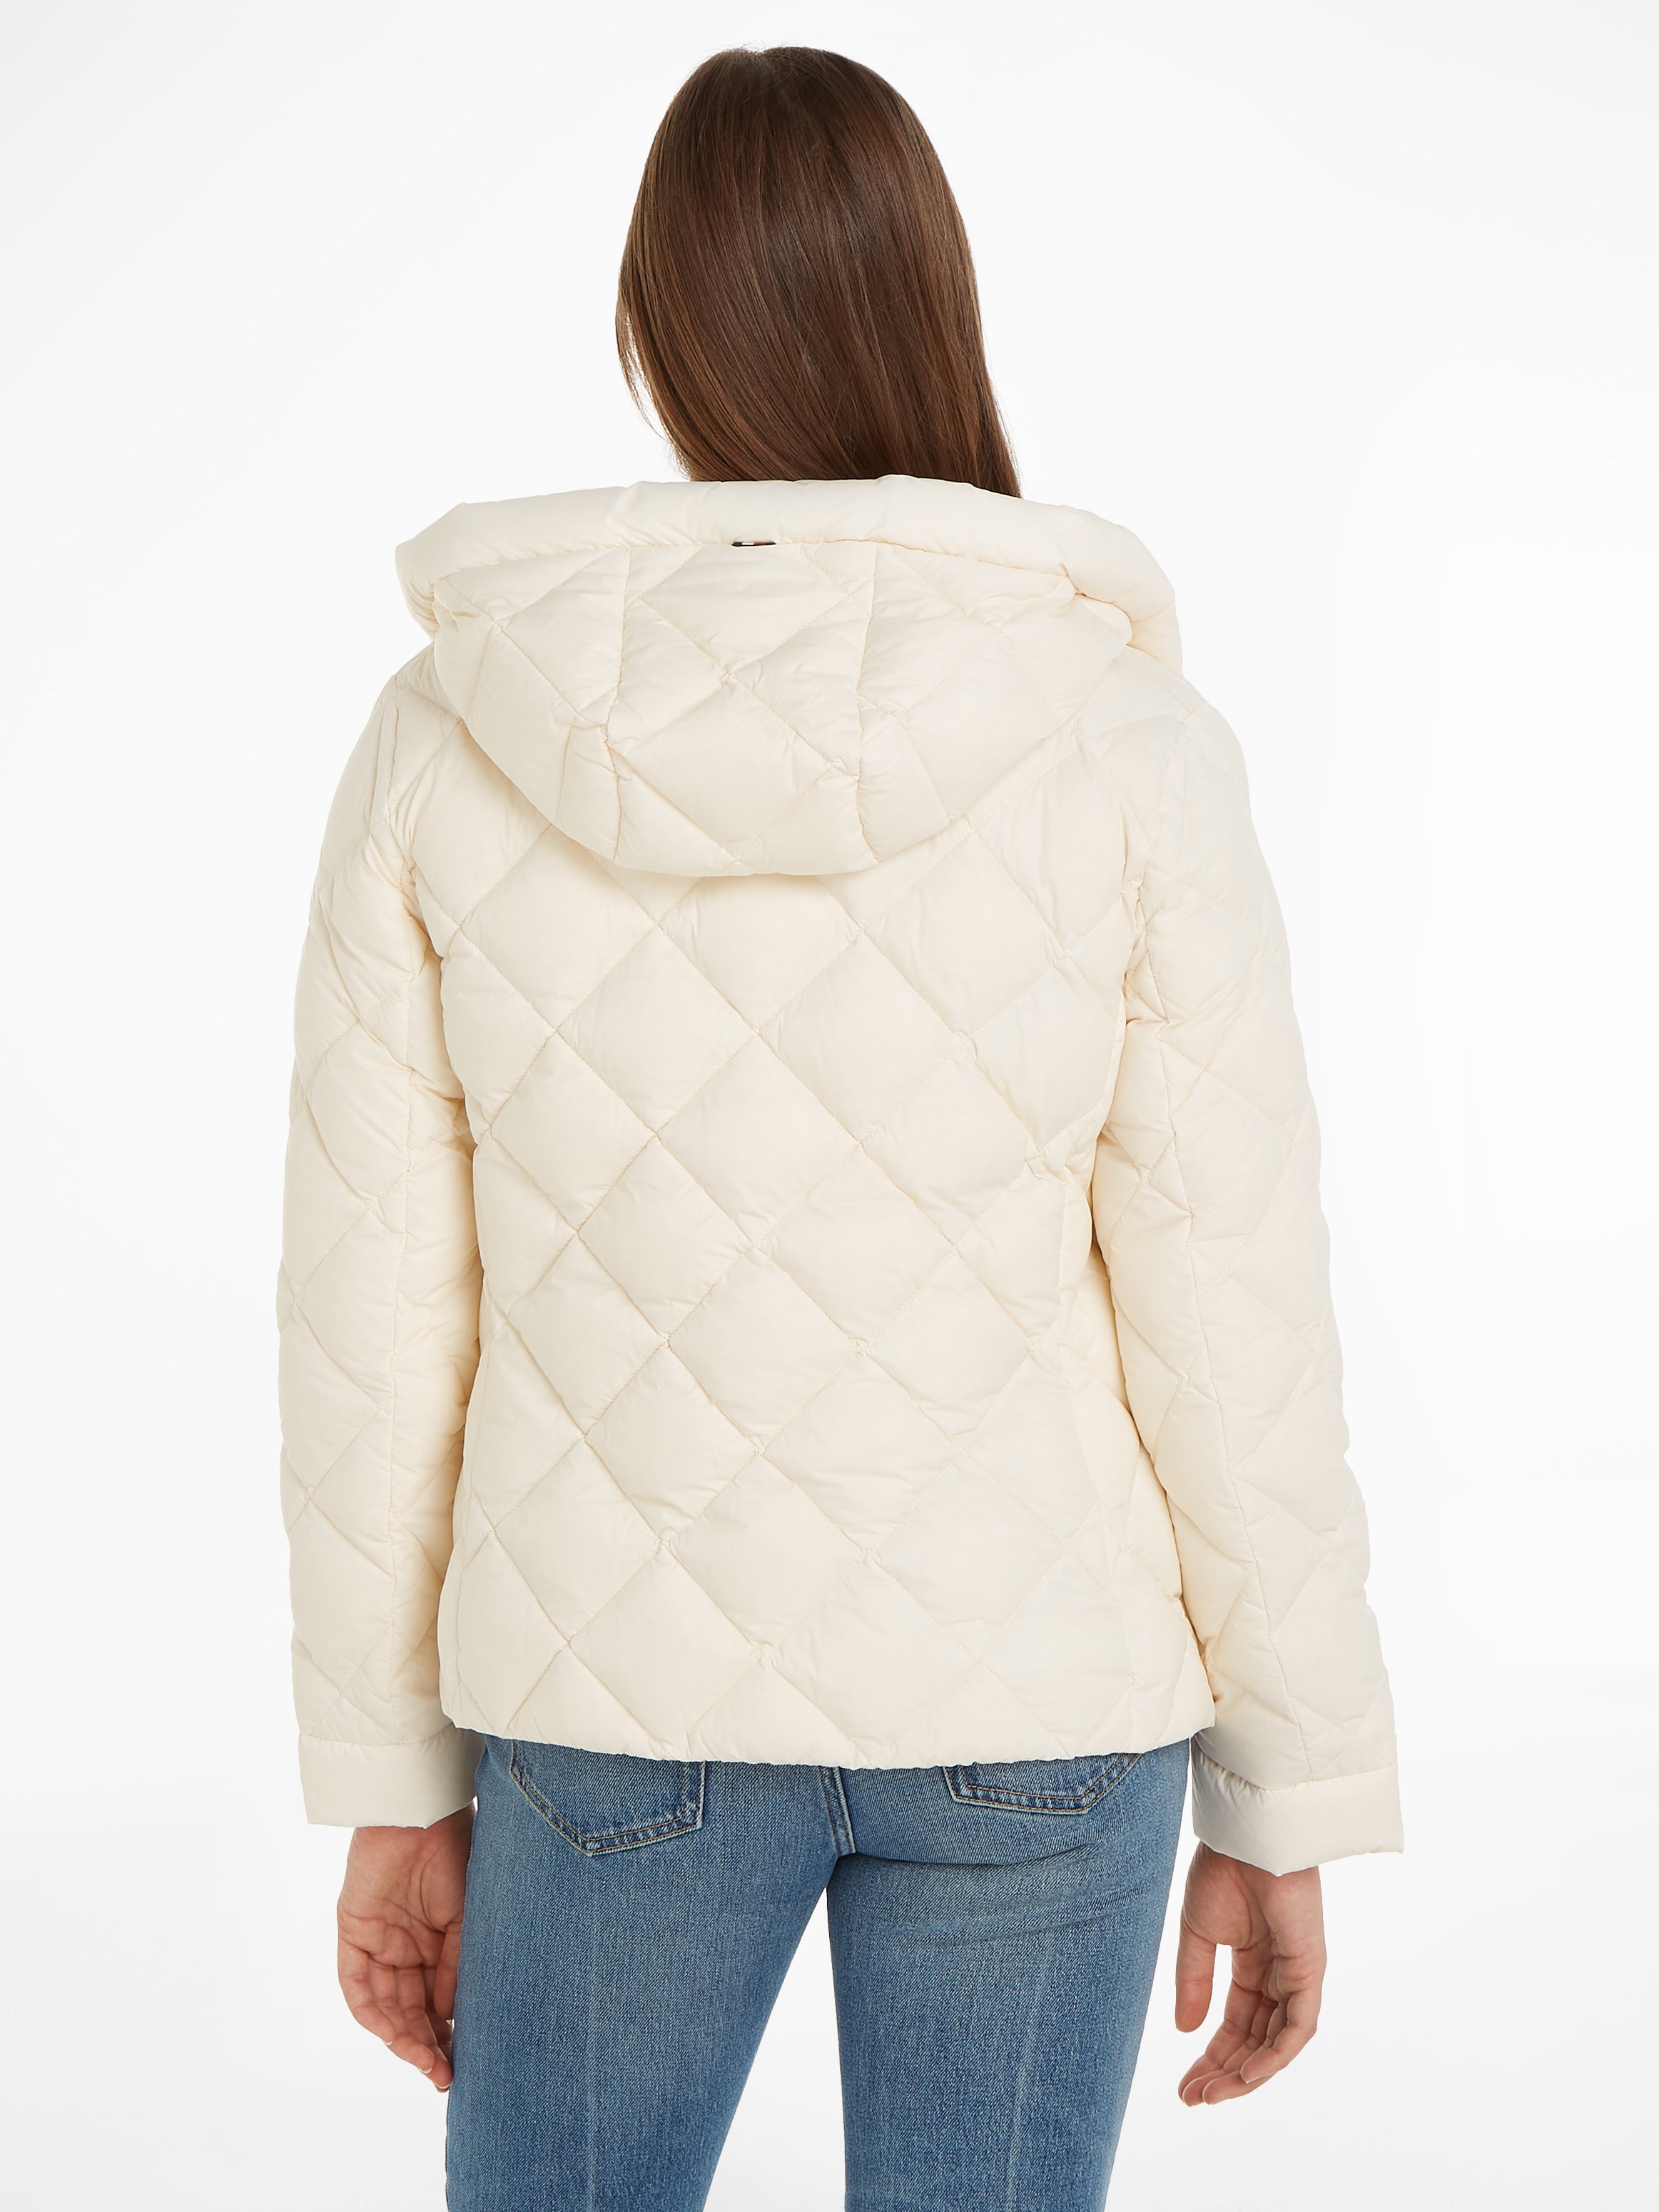 Tommy Hilfiger Steppjacke »CLASSIC LW DOWN QUILTED JACKET«, mit Kapuze, mit Steppung